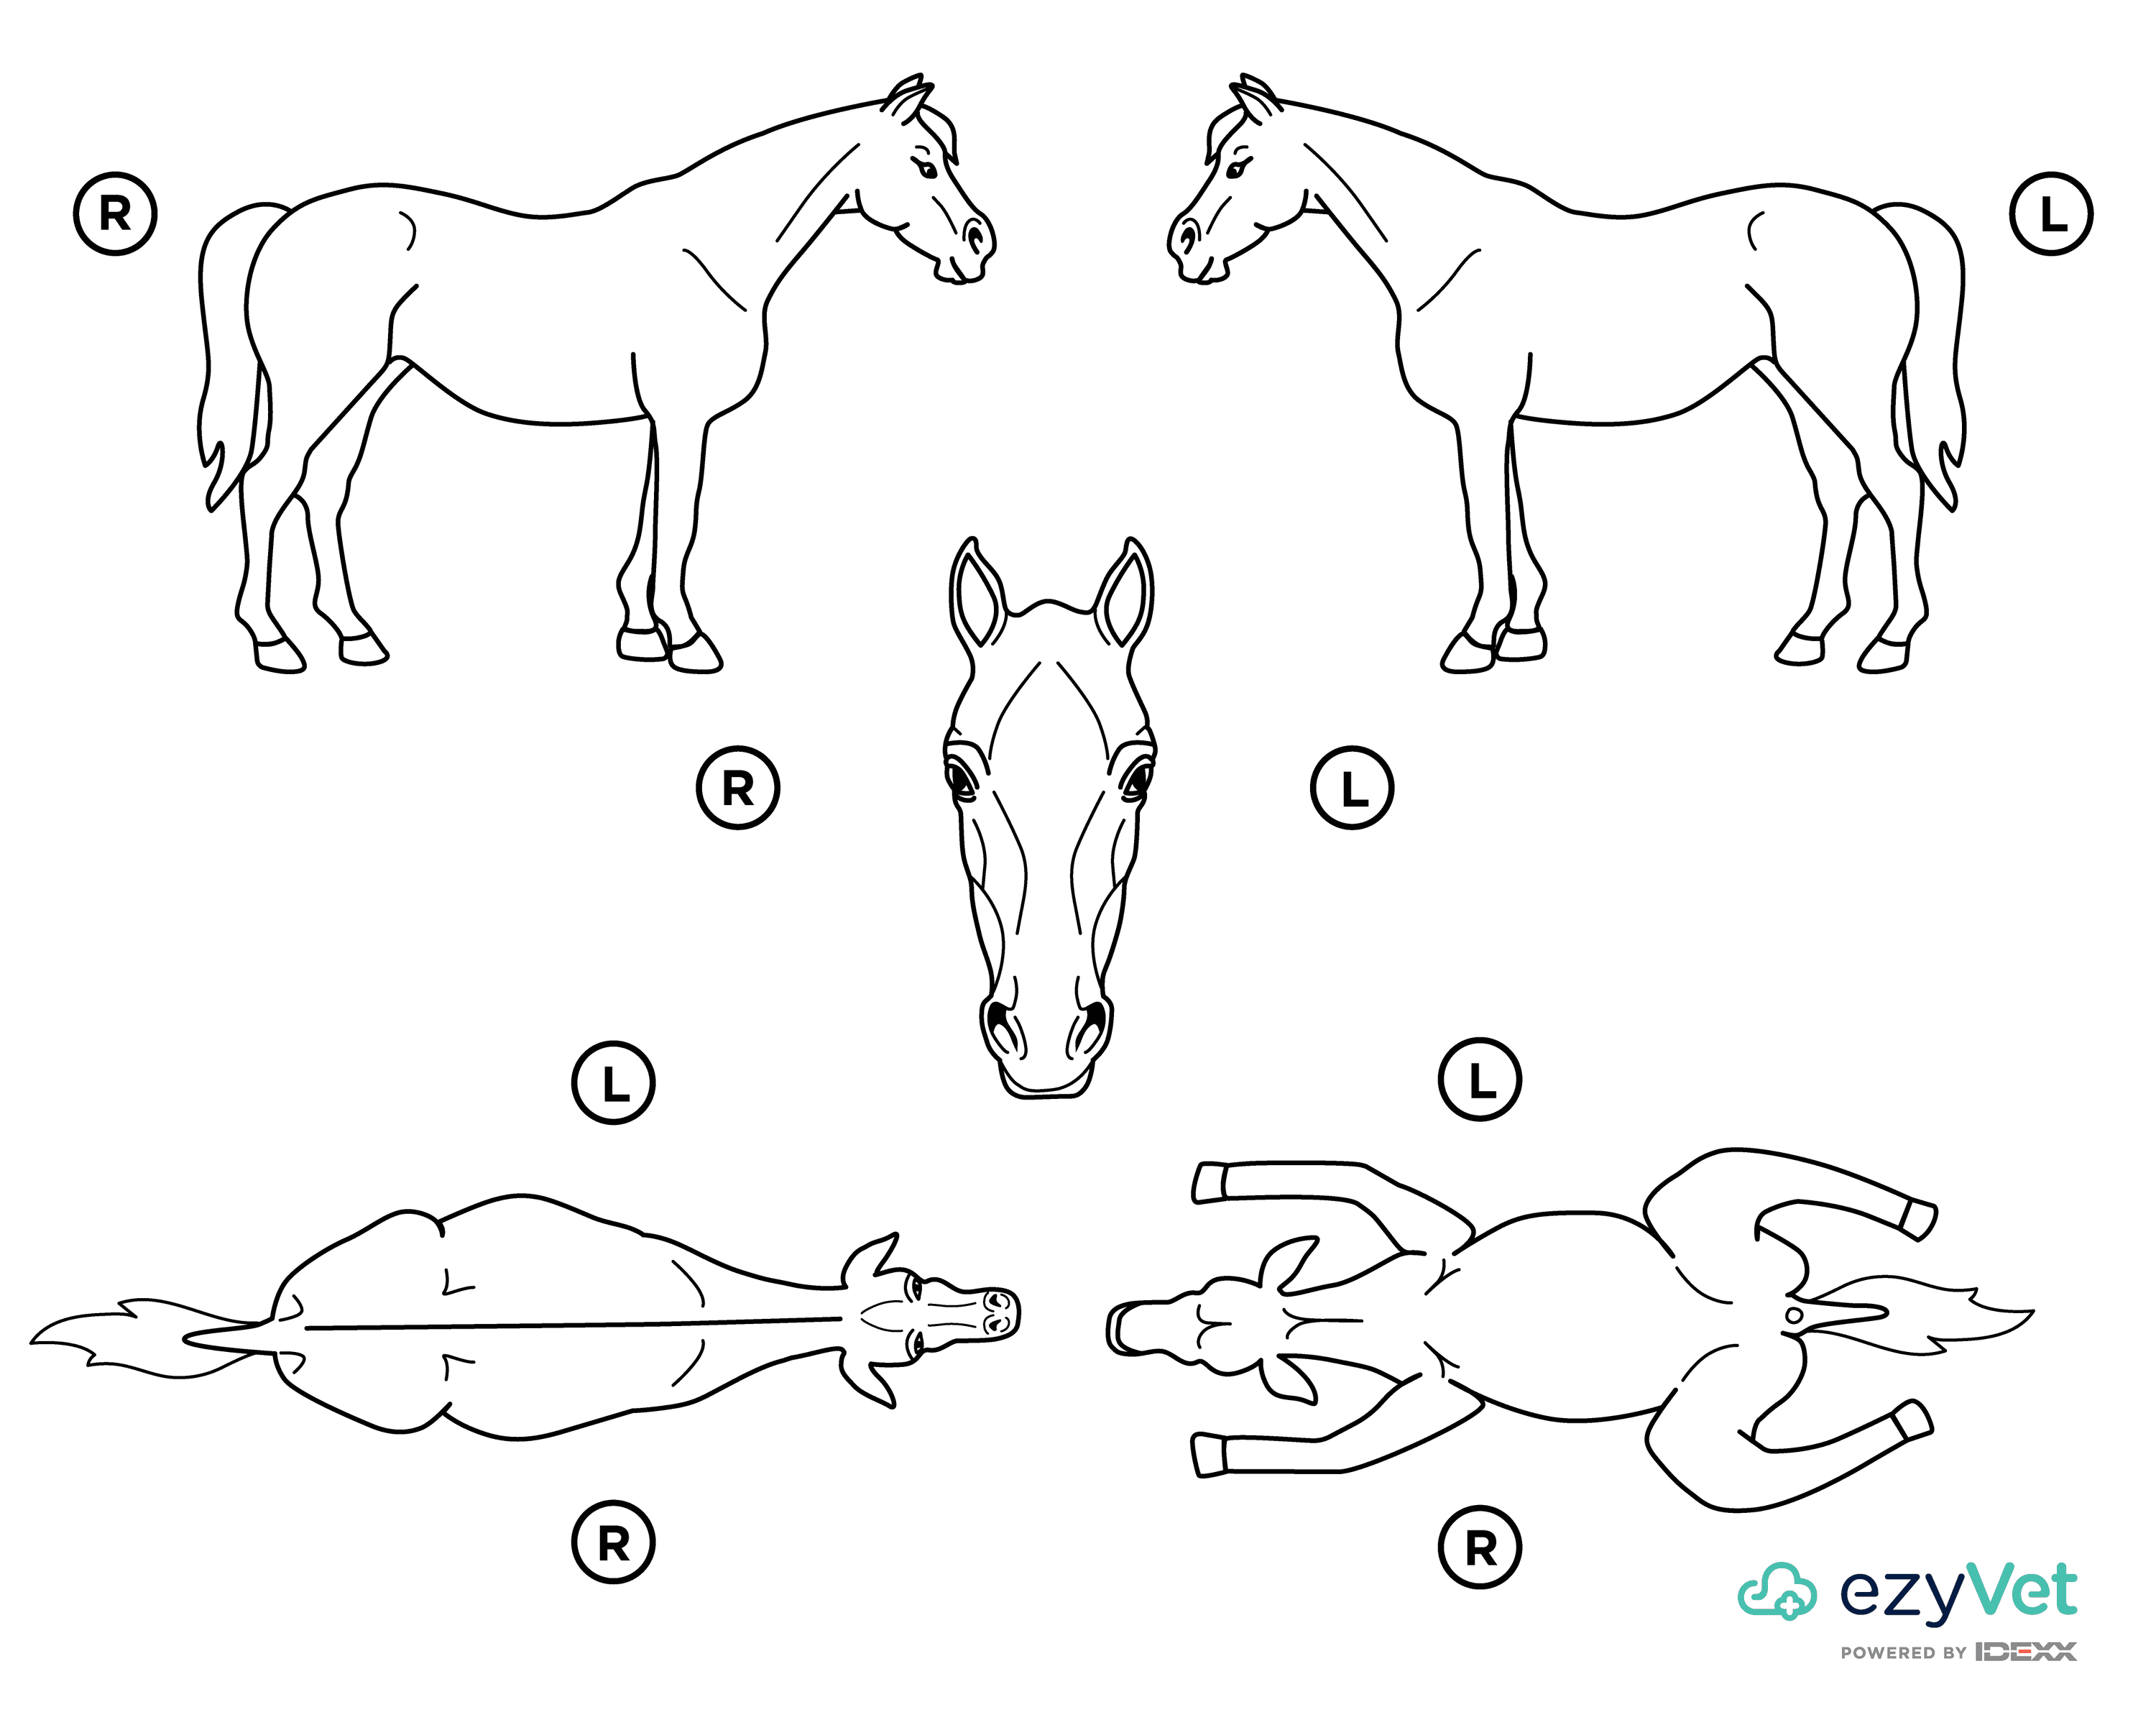 Downloadable horse body map